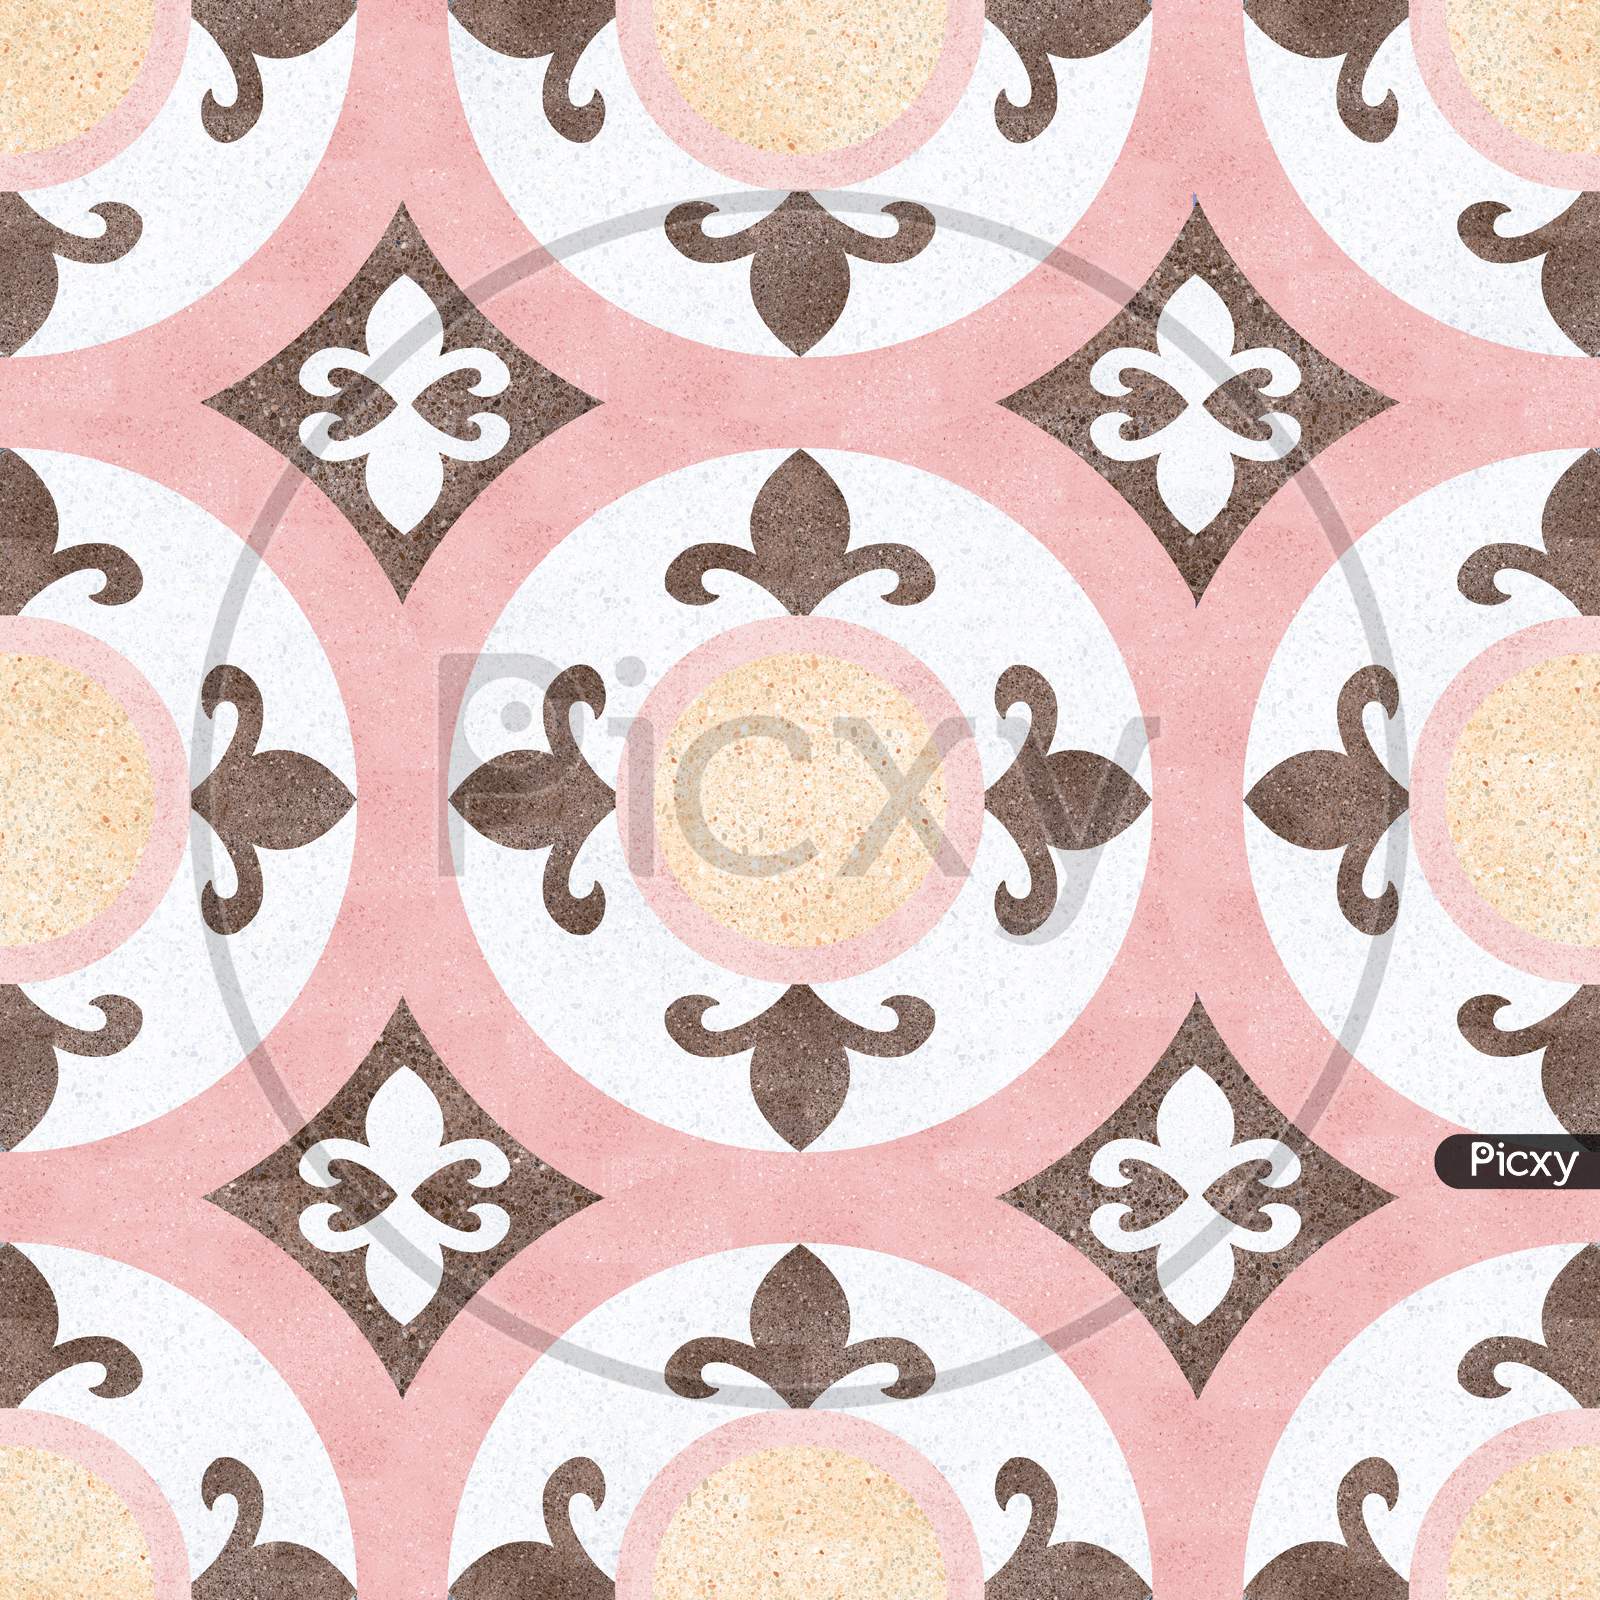 Pink Marble Geometric Pattern Shape Floor And Wall Mosaic Decor Tile.